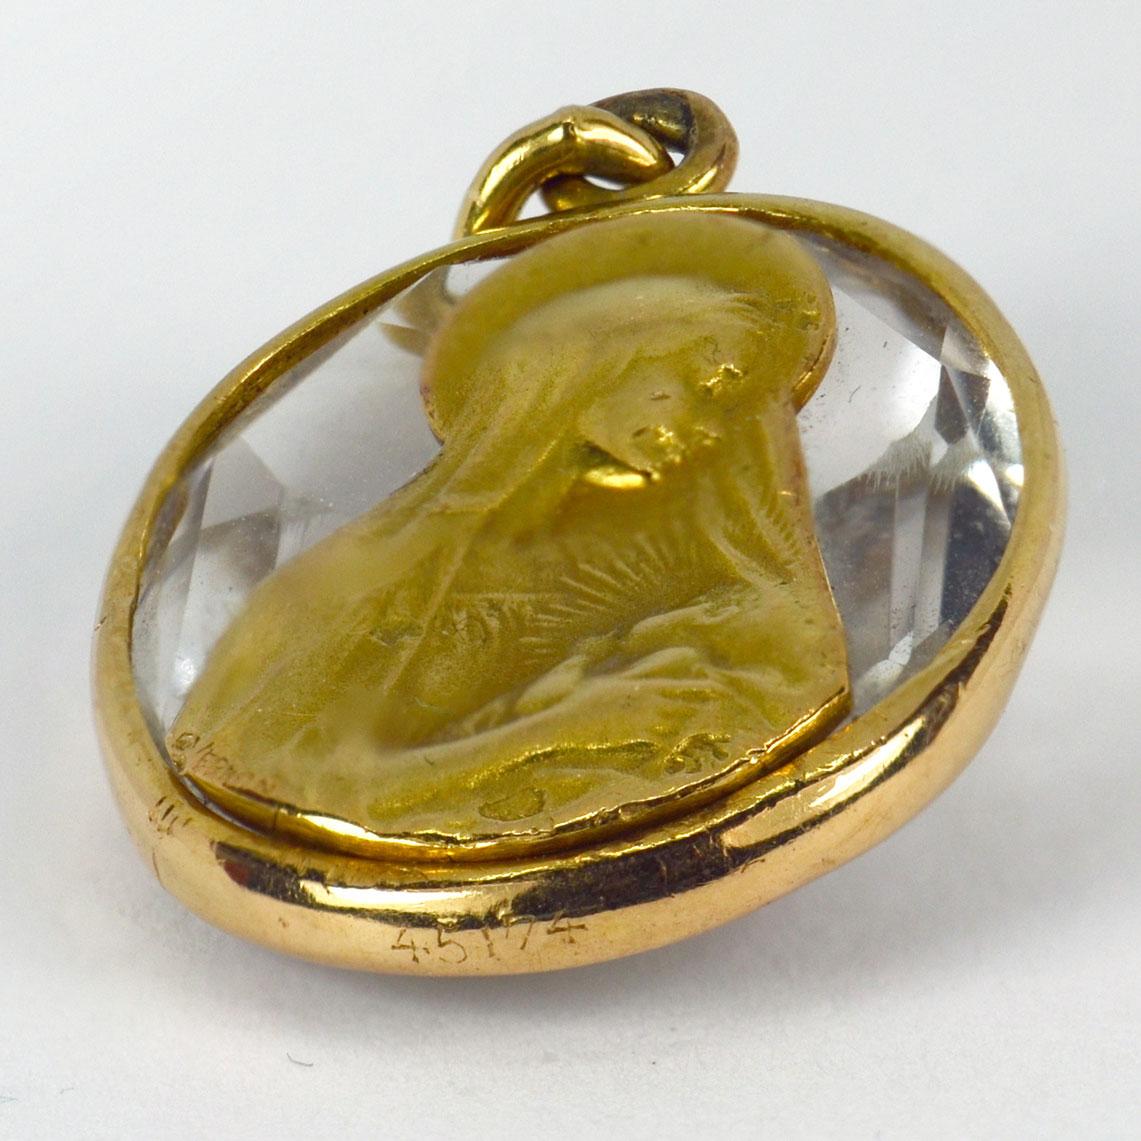 A French 18 karat (18K) yellow gold charm pendant designed as an oval faceted rock crystal in a gold frame, with an inset gold plaque depicting the Madonna and child. Signed G. Vernon and numbered 45174. Stamped with the eagle’s head for French